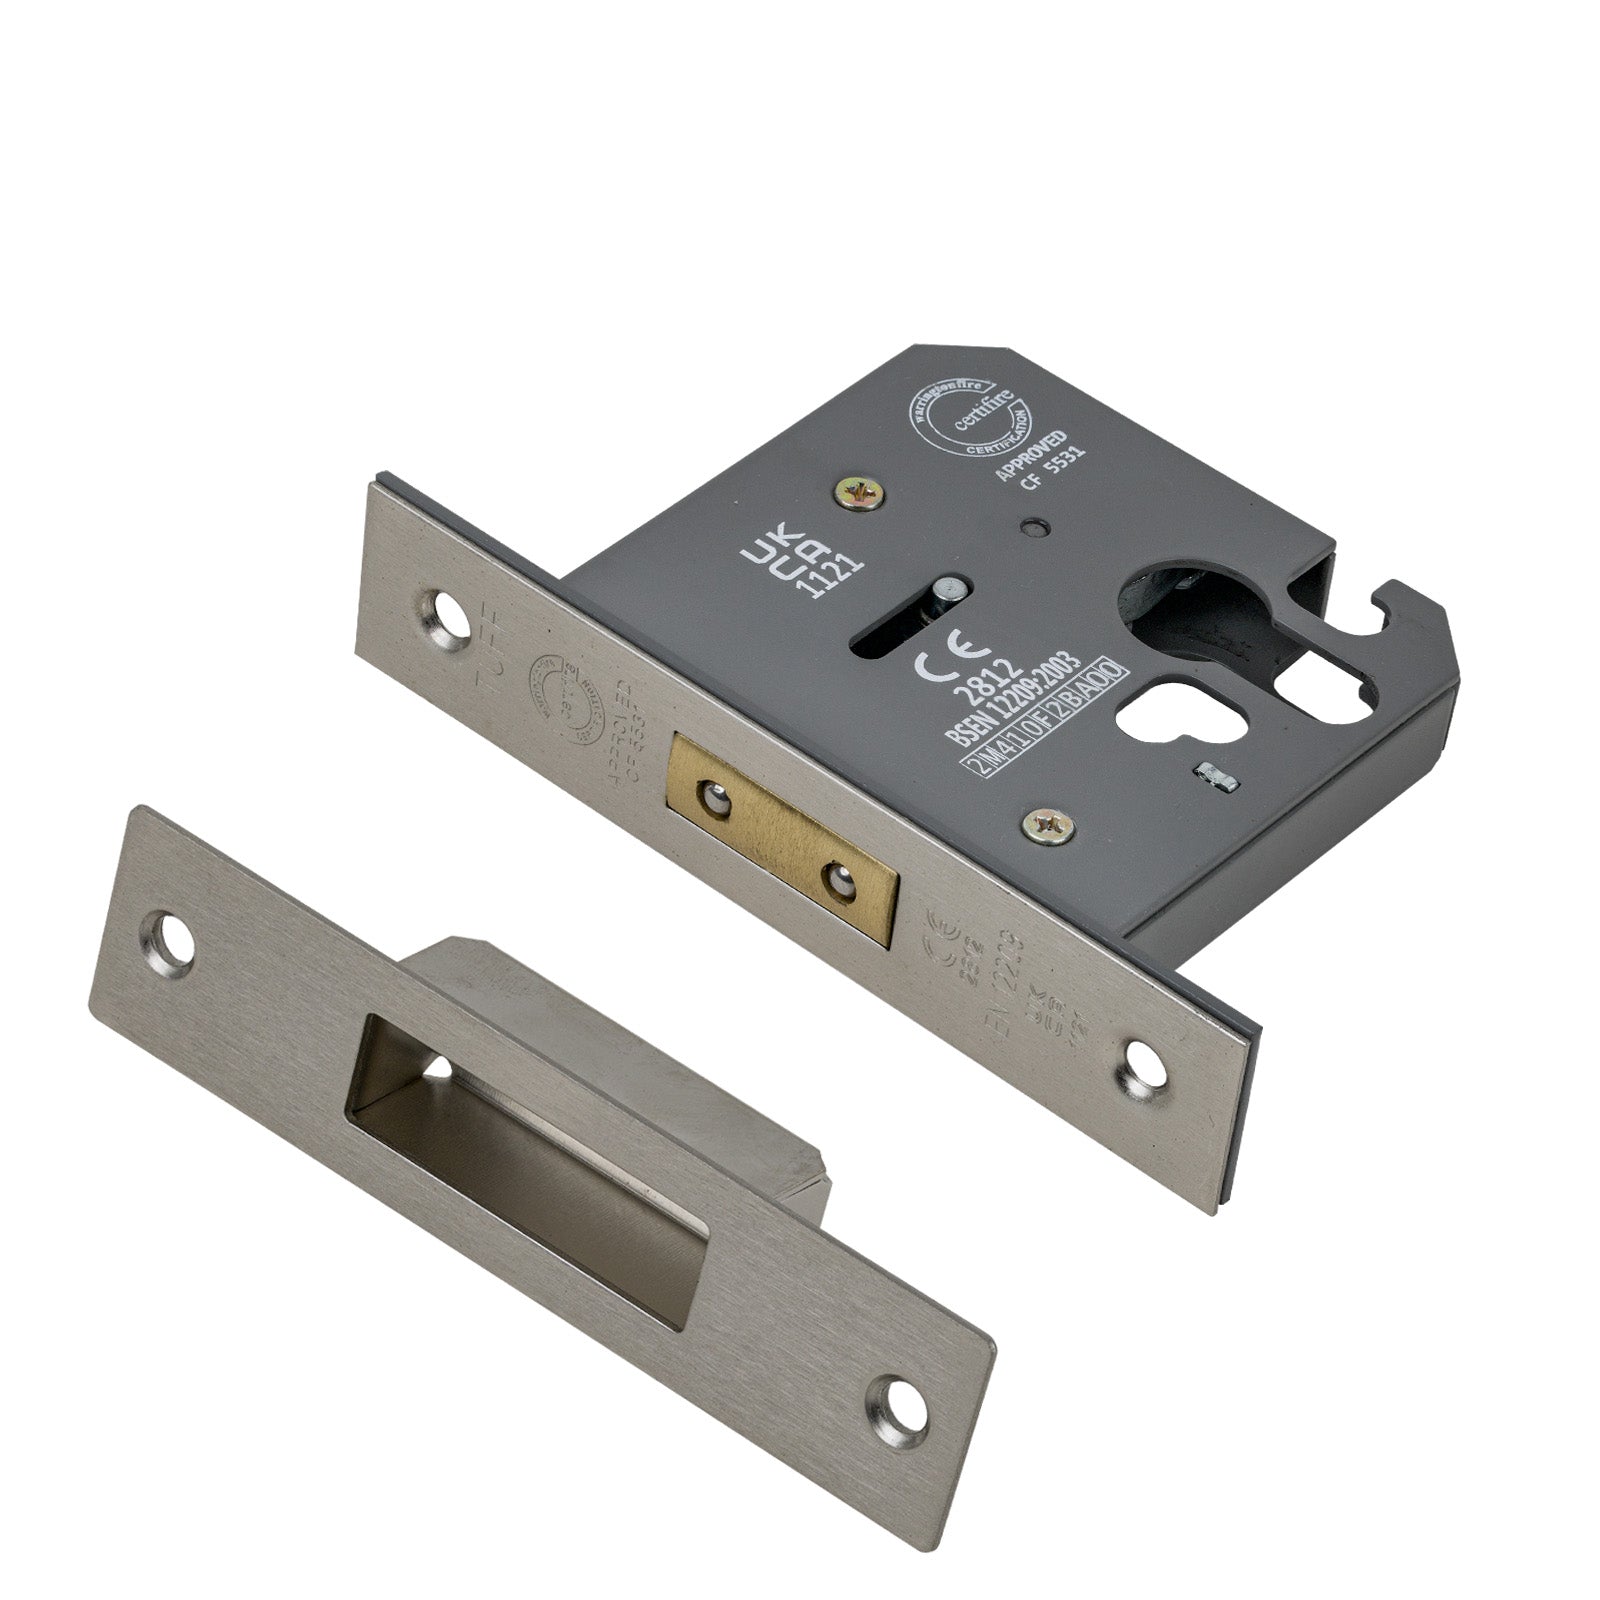 SHOW 3 Lever Euro Deadlock - 3 Inch with Nickel finished forend and striker plate